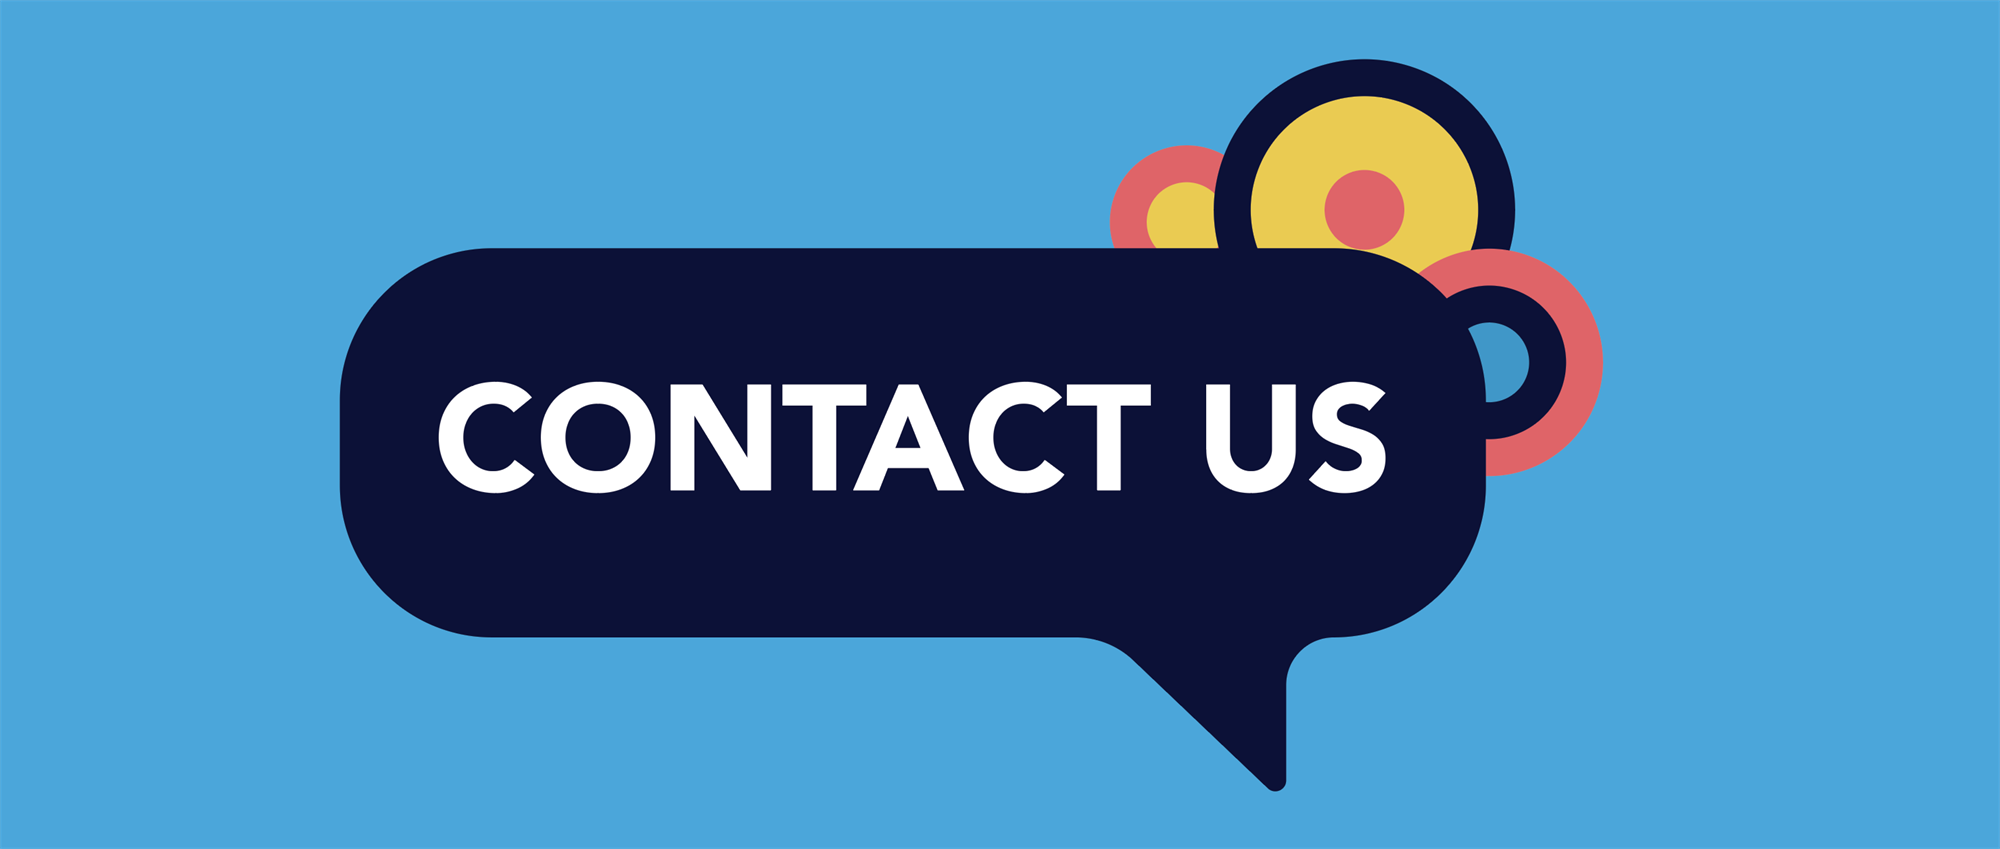 If you can't find the answers to your question, contact us today